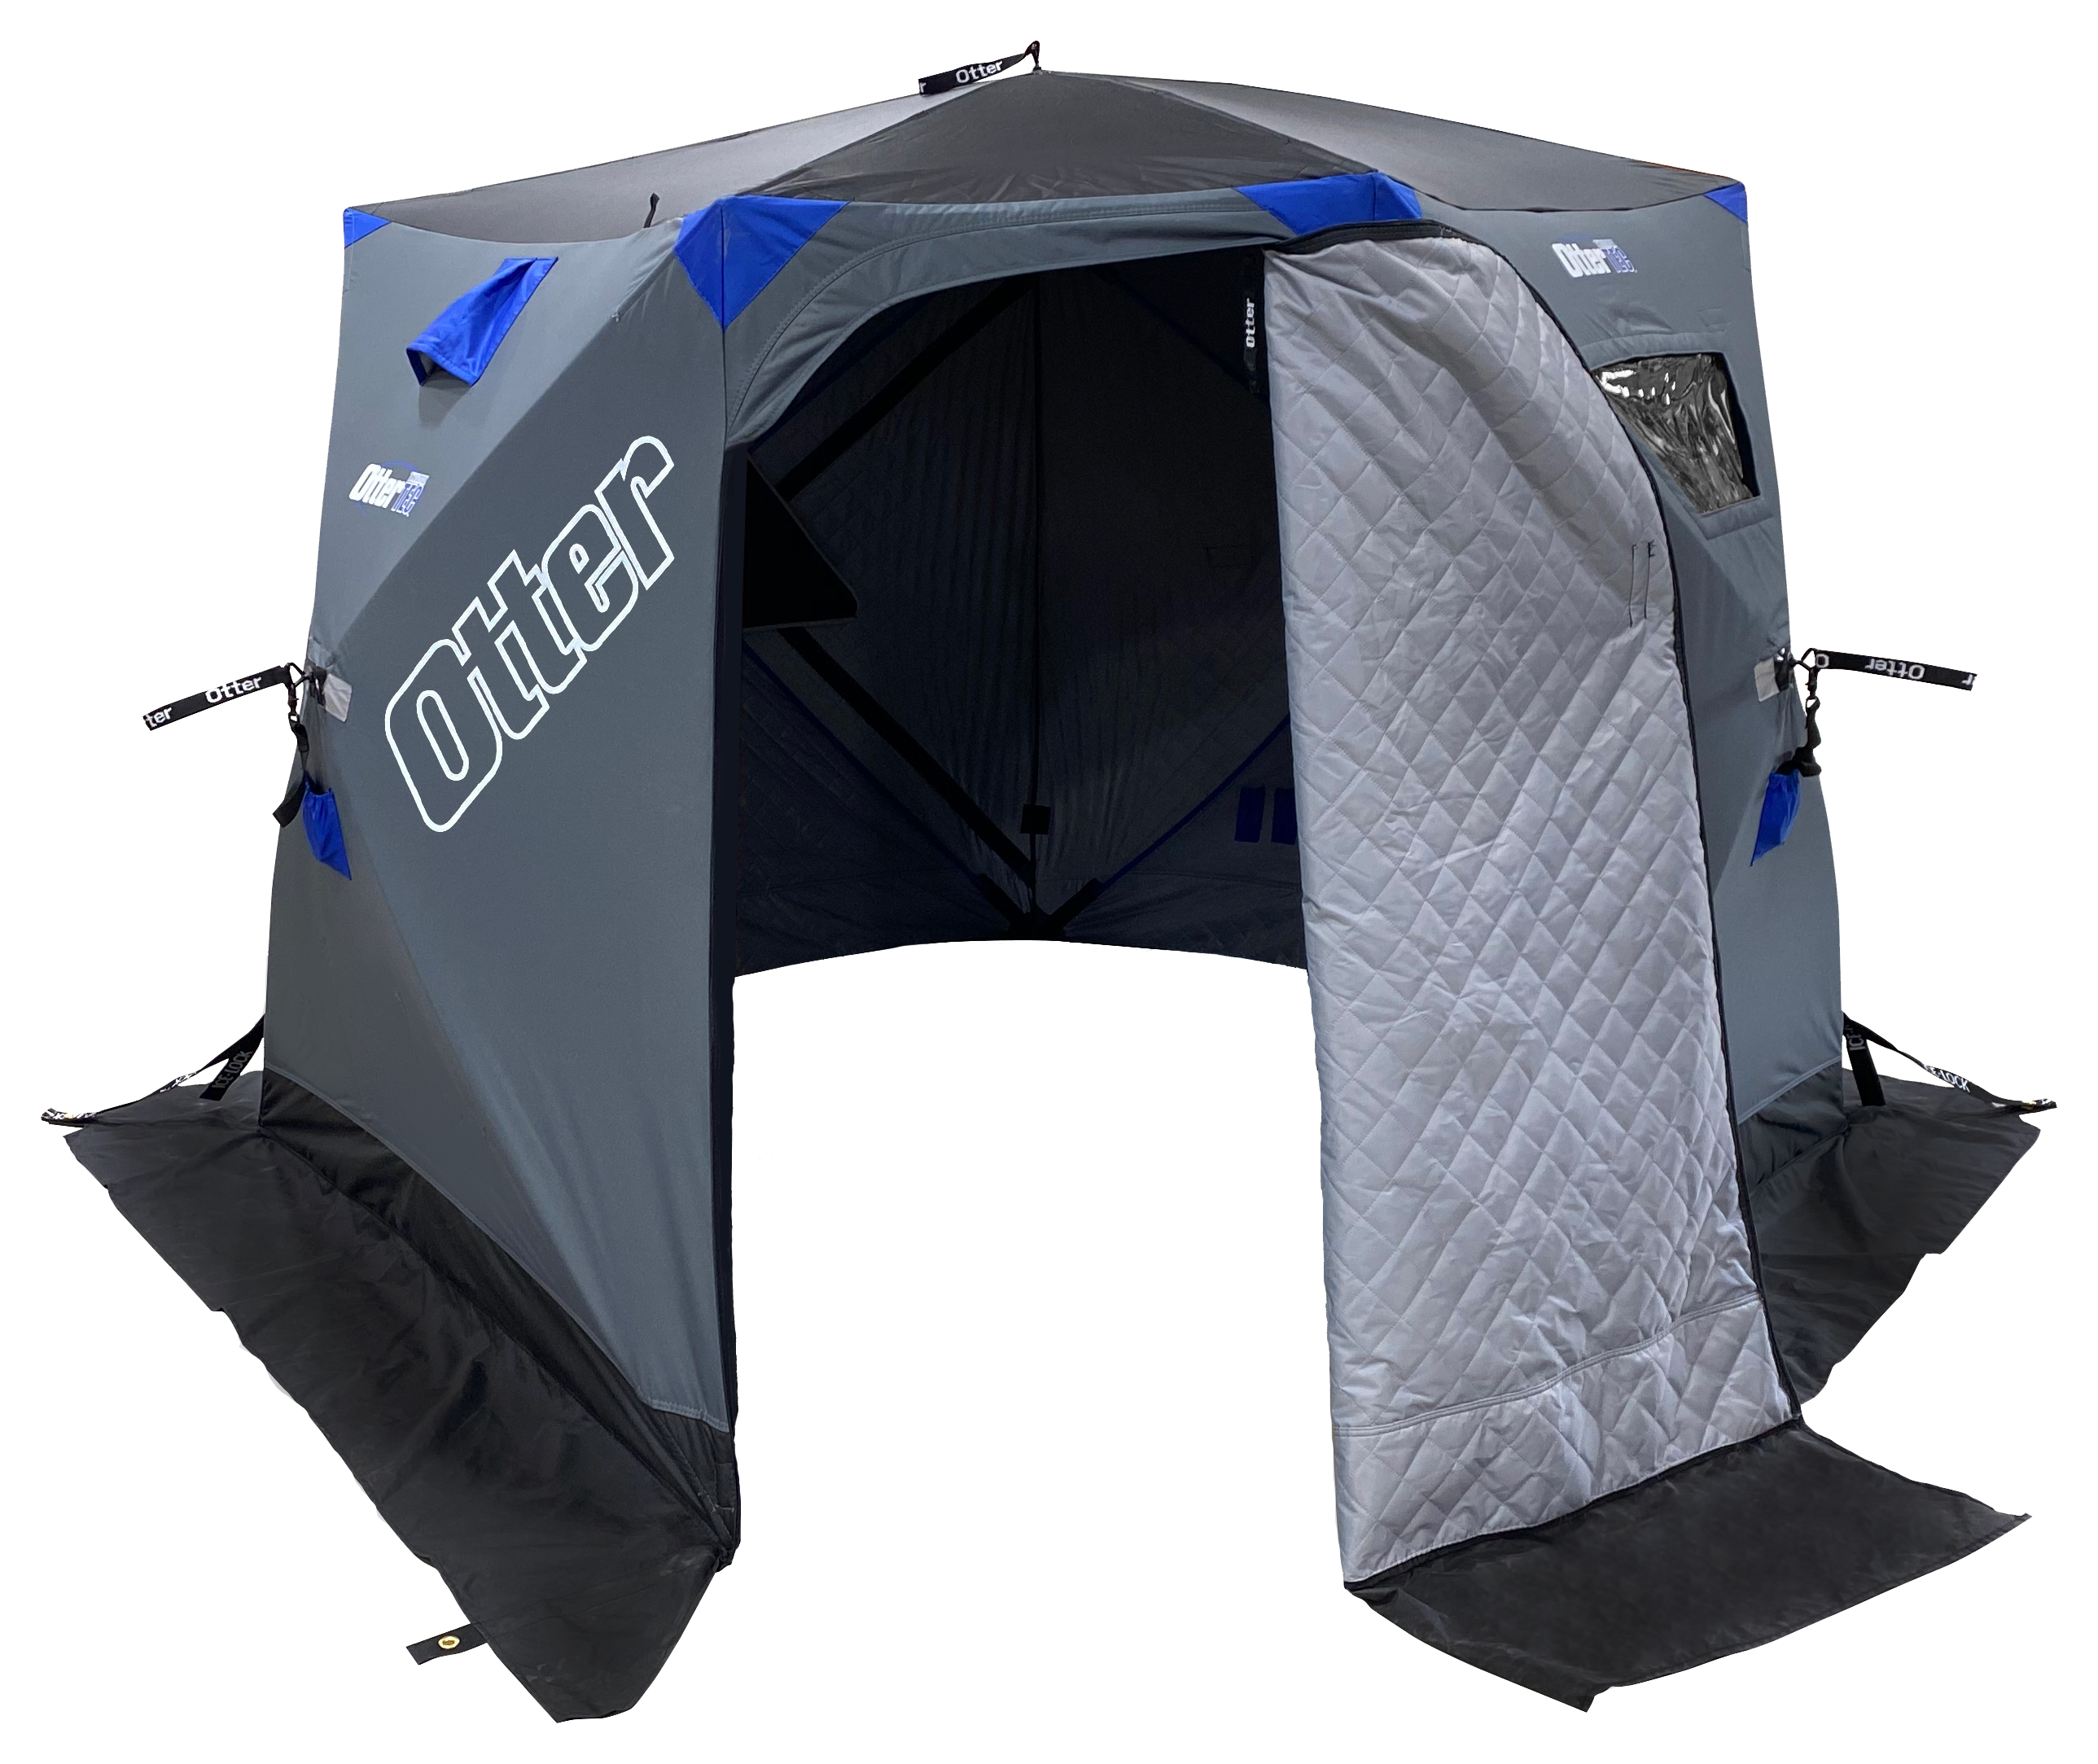 Otter Vortex Pro Cabin Thermal Ice Shelter